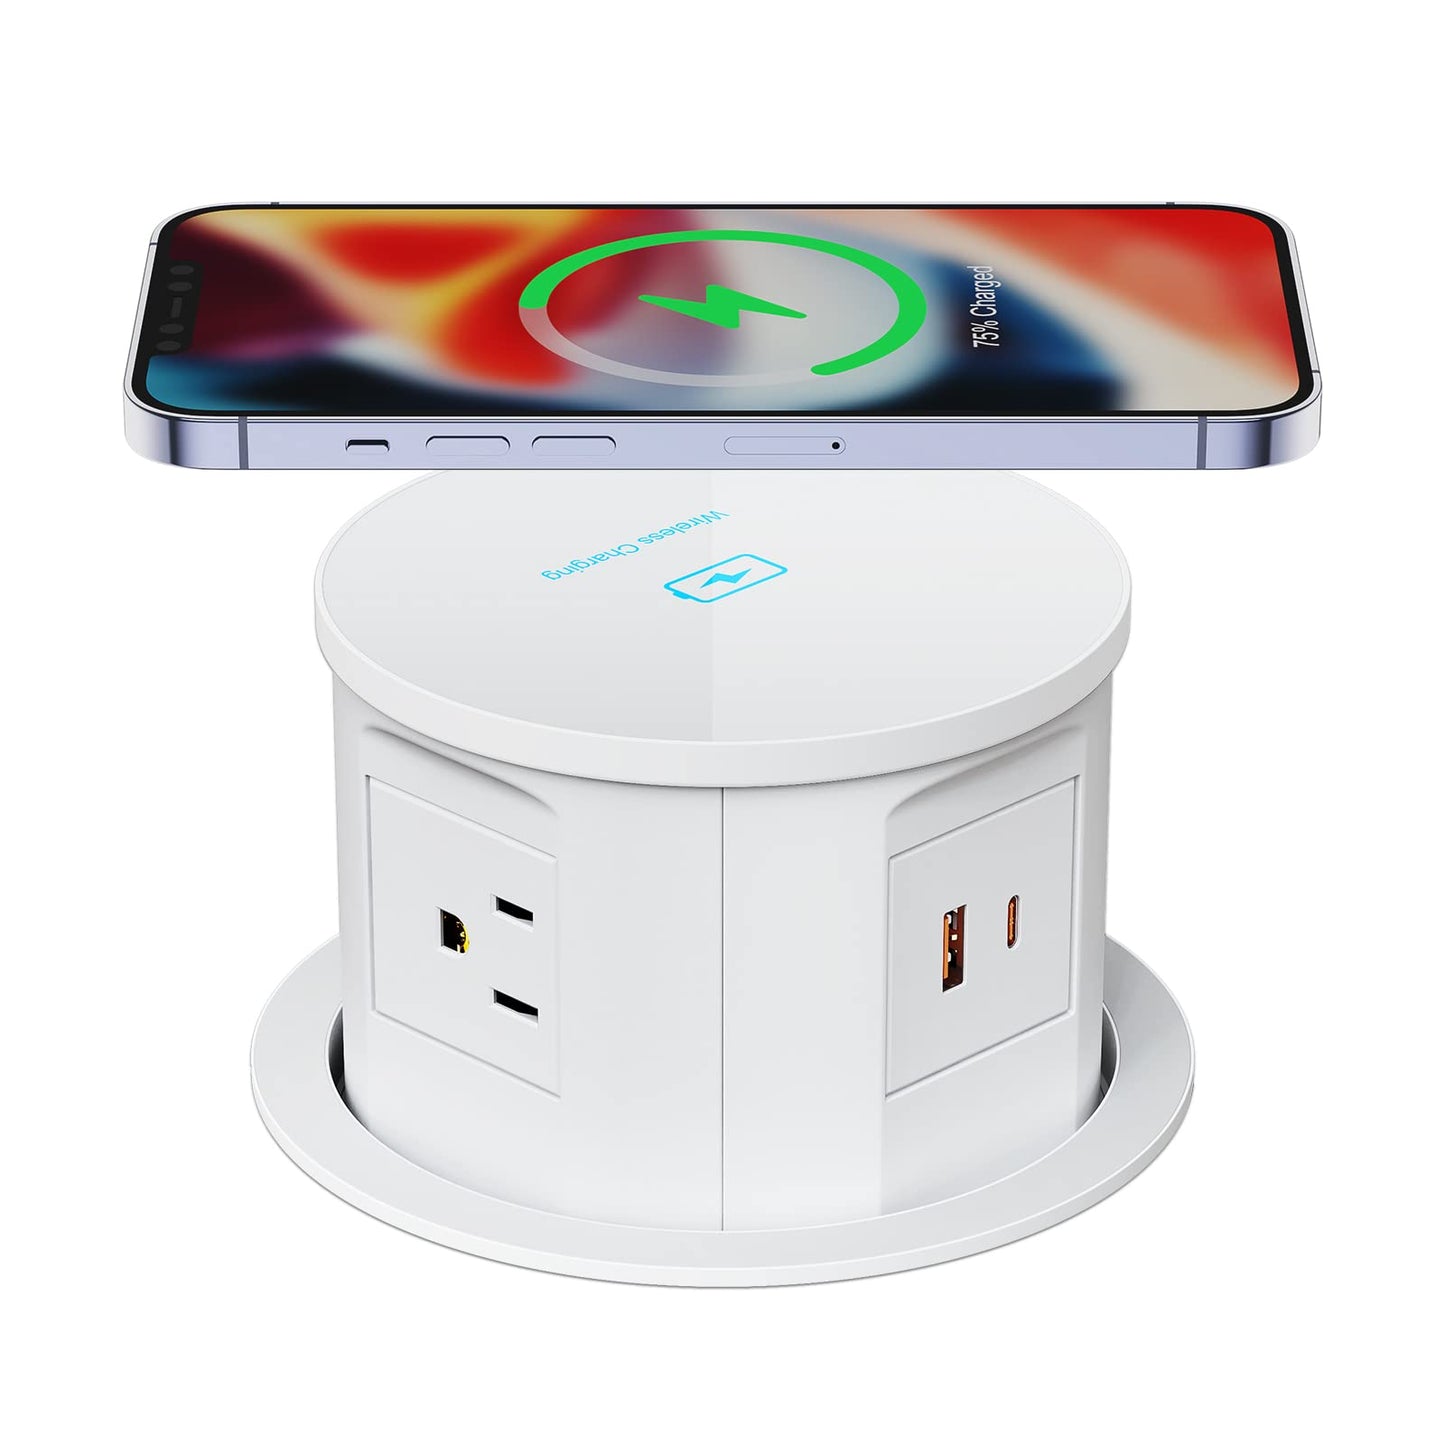 Hidden Outlet with 18W Wireless Charger 4 AC Plug 1 USB-A and 1 USB-C Port